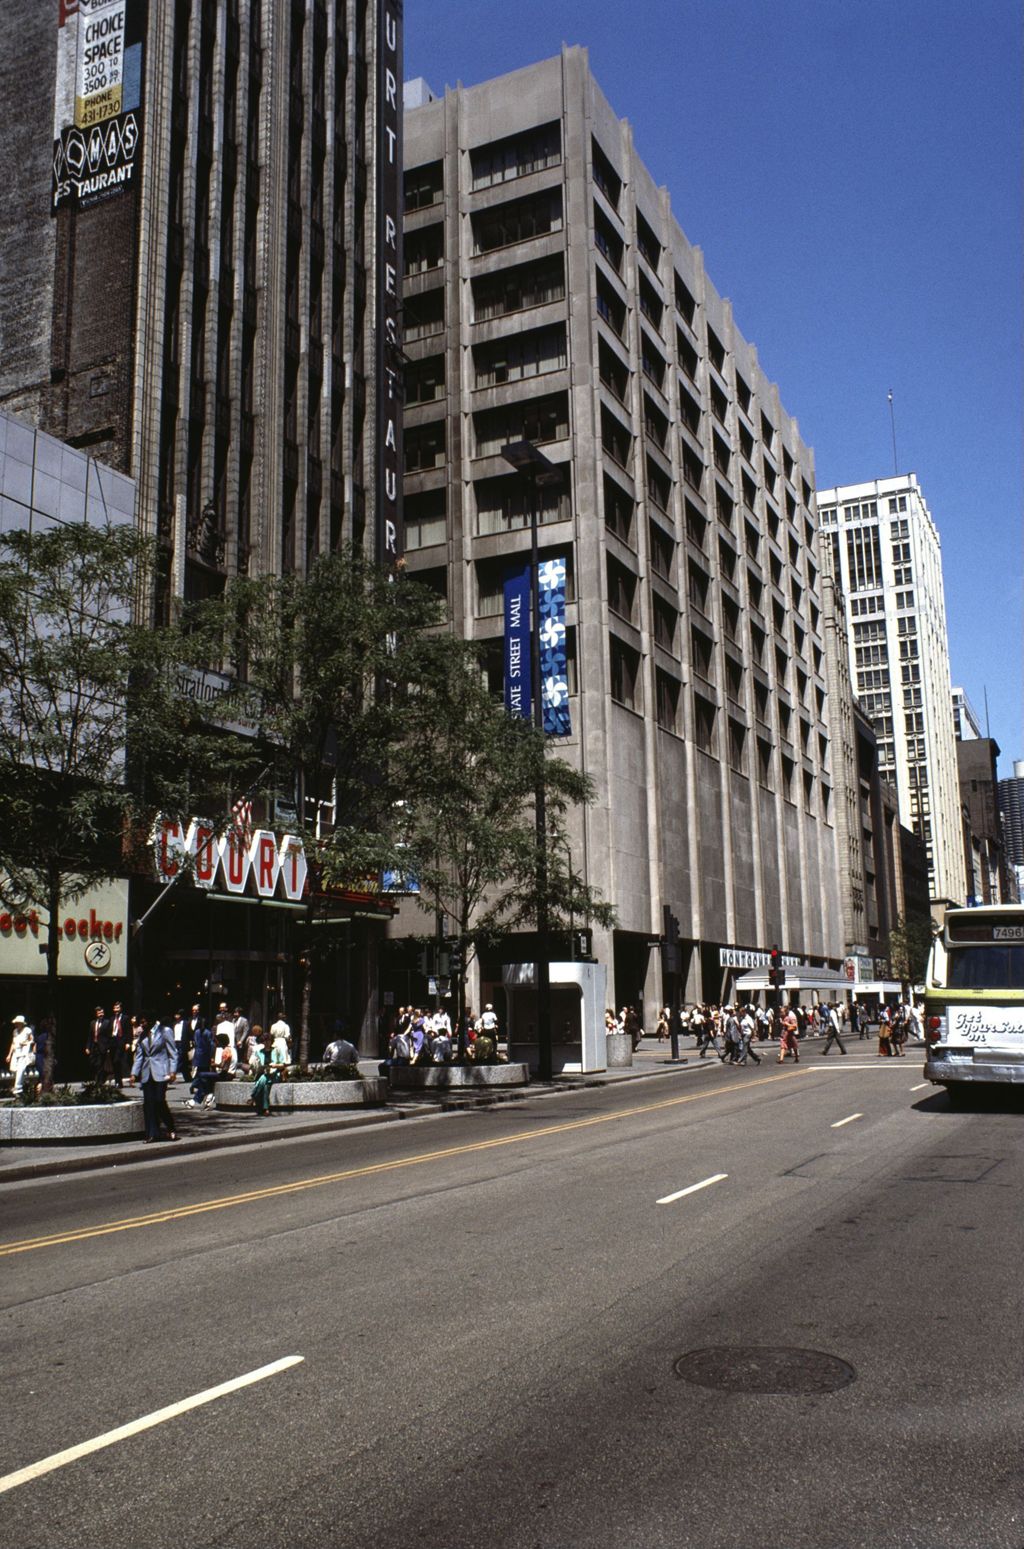 State Street Mall and Montgomery Ward's Store